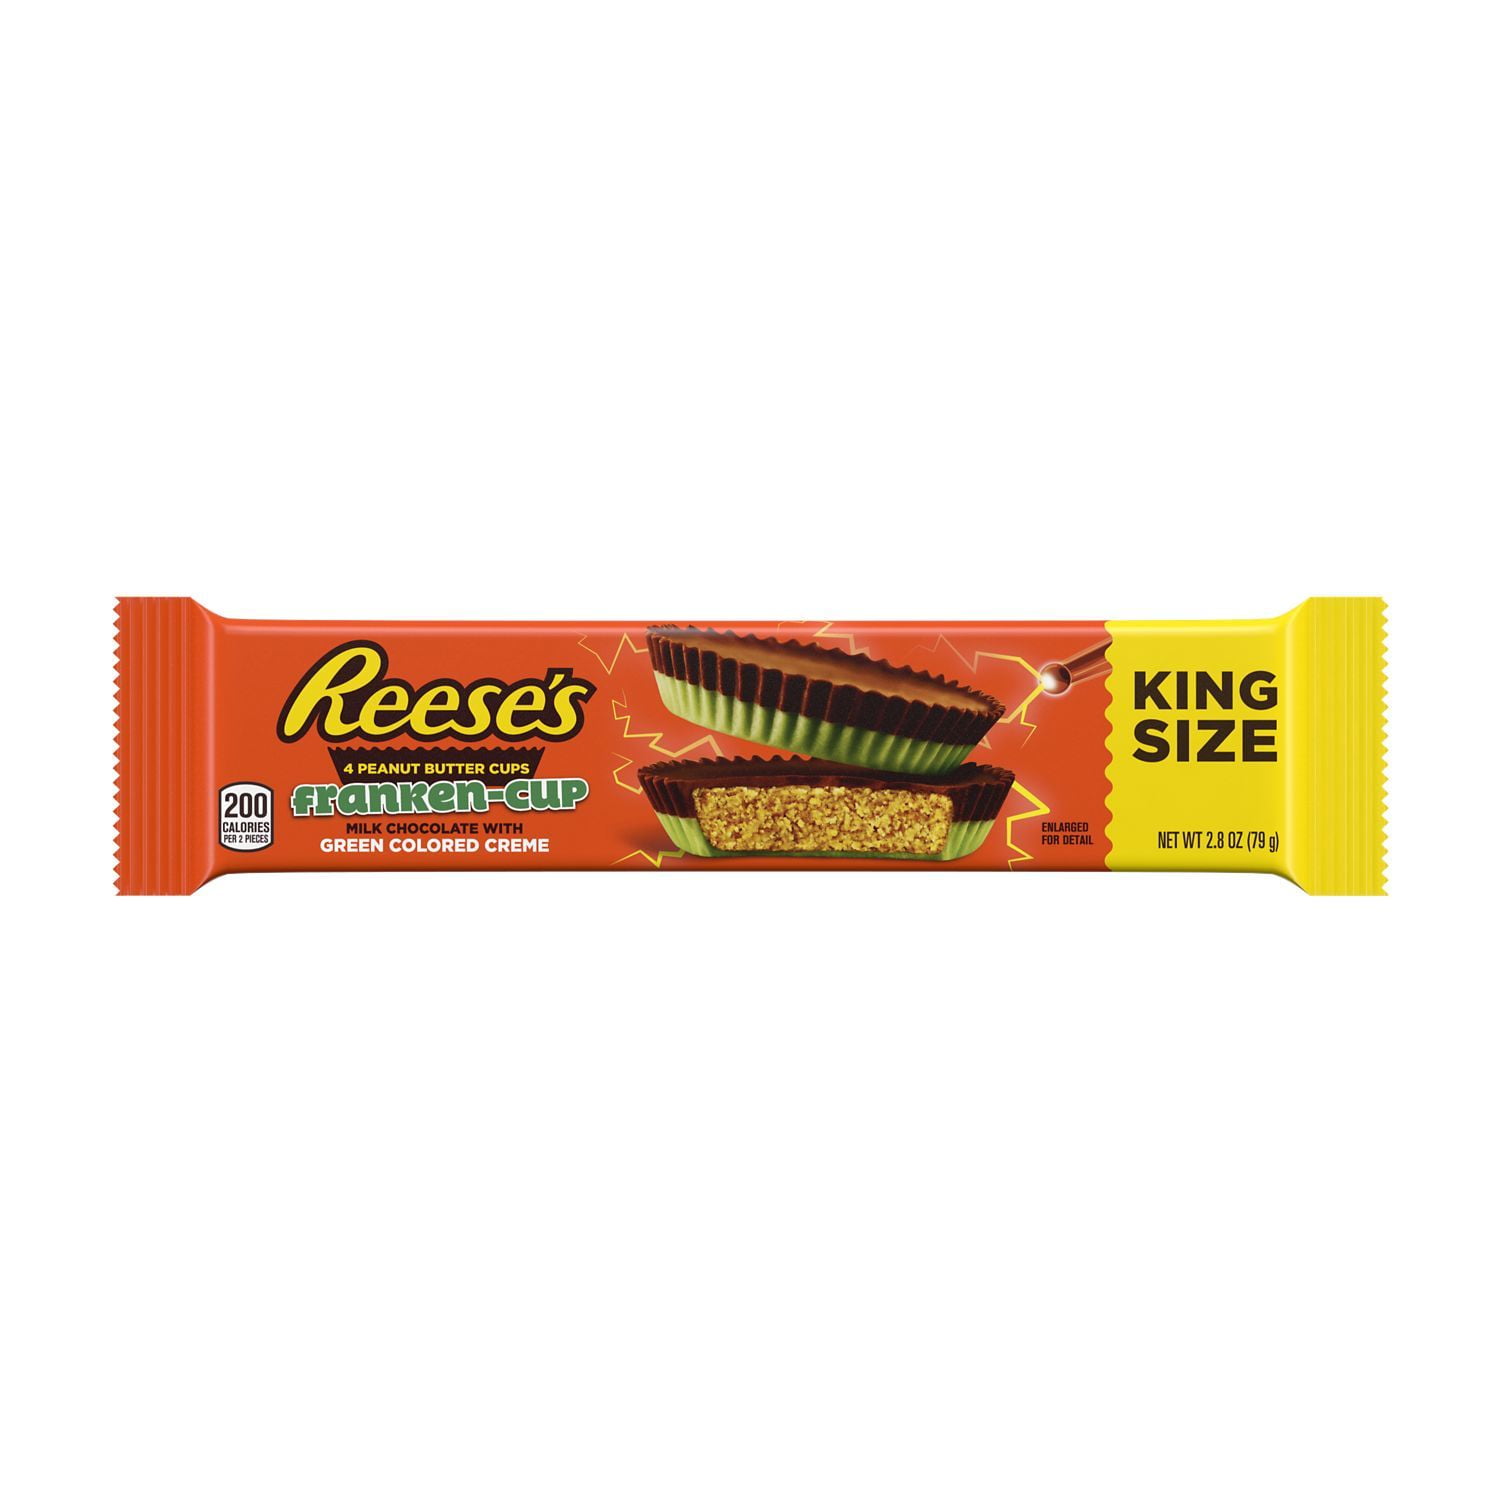 REESE'S, Franken-Cup Milk Chocolate Peanut Butter with Green Creme Cups Candy, Halloween, 2.8 oz, King Size Pack (4 Pieces)